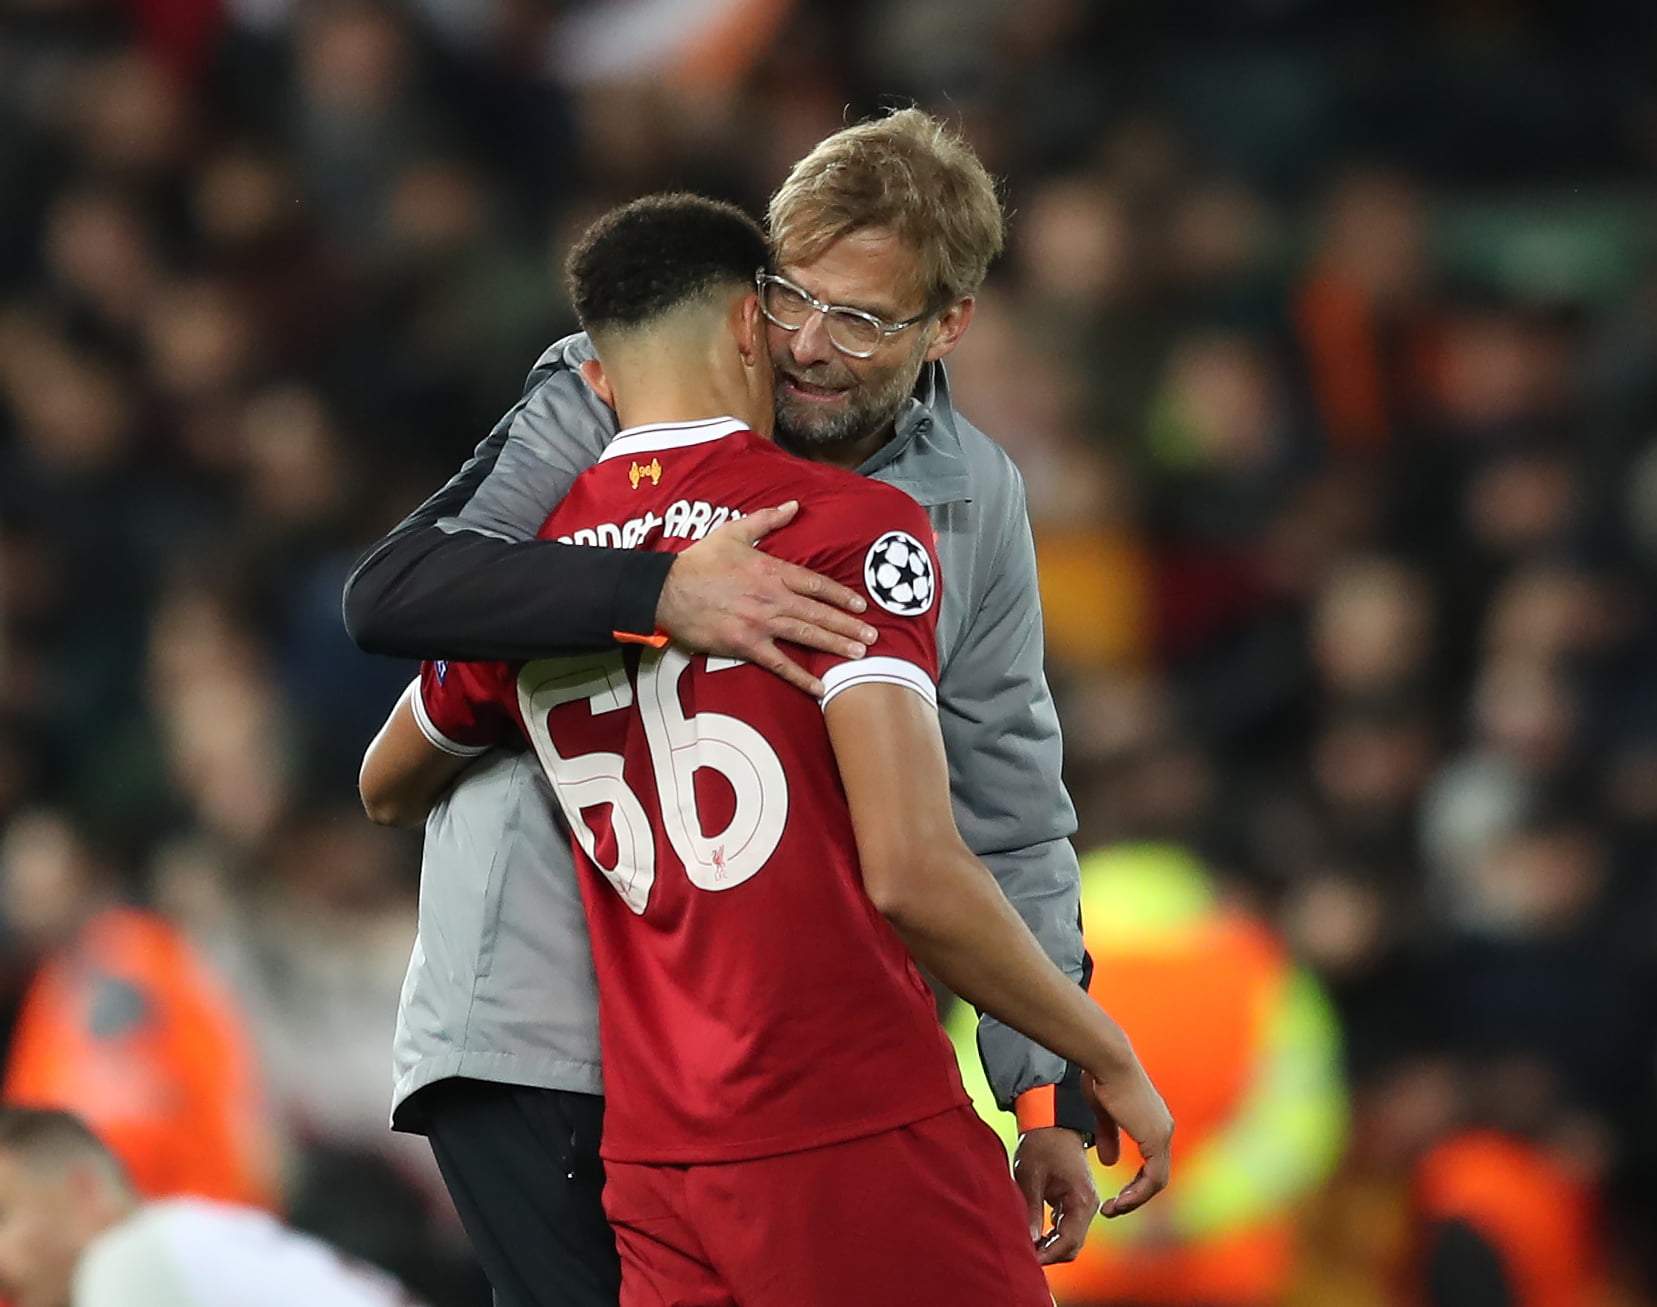 April 24, 2018 - Liverpool, United Kingdom - Trent Alexander Arnold of Liverpool hugged by manger Jurgen Klopp during the Champions League Semi Final 1st Leg match at Anfield Stadium, Liverpool. Picture date: 24th April 2018. Picture credit should read: Simon Bellis/Sportimage(Credit Image: © Simon Bellis/CSM via ZUMA Wire) FOT. ZUMAPRESS.com / NEWSPIX.PL POLAND ONLY !!! --- Newspix.pl *** Local Caption *** www.newspix.pl mail us: info@newspix.pl call us: 0048 022 23 22 222 --- Polish Picture Agency by Ringier Axel Springer Poland